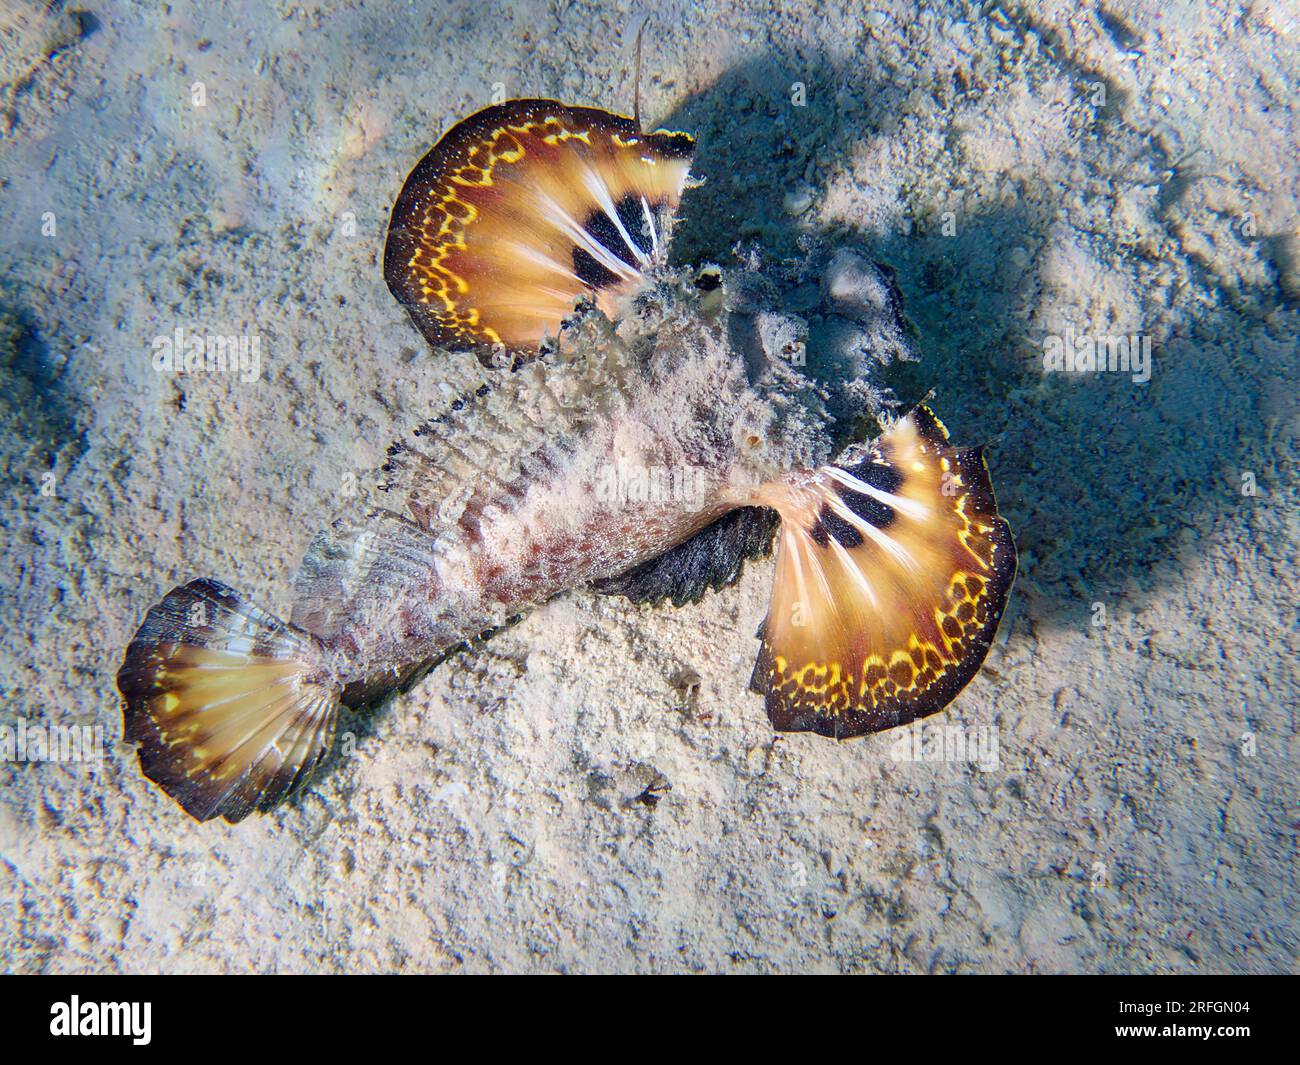 Inimicus filamentosus, also known as the filament-finned stinger, underwater photo into the Red Sea Stock Photo